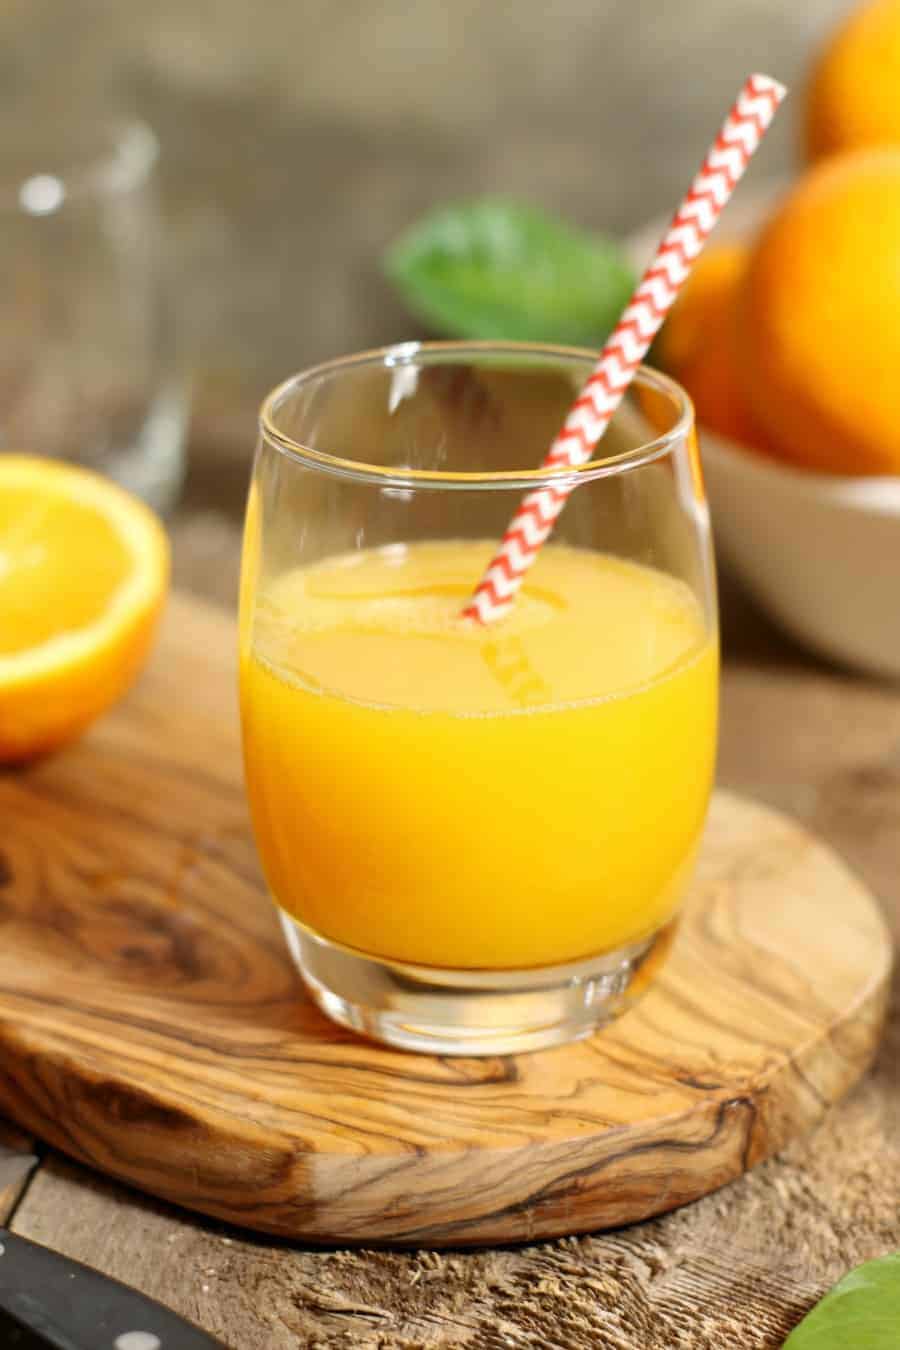 A glass of homemade, fresh squeezed orange juice on a wooden serving board.